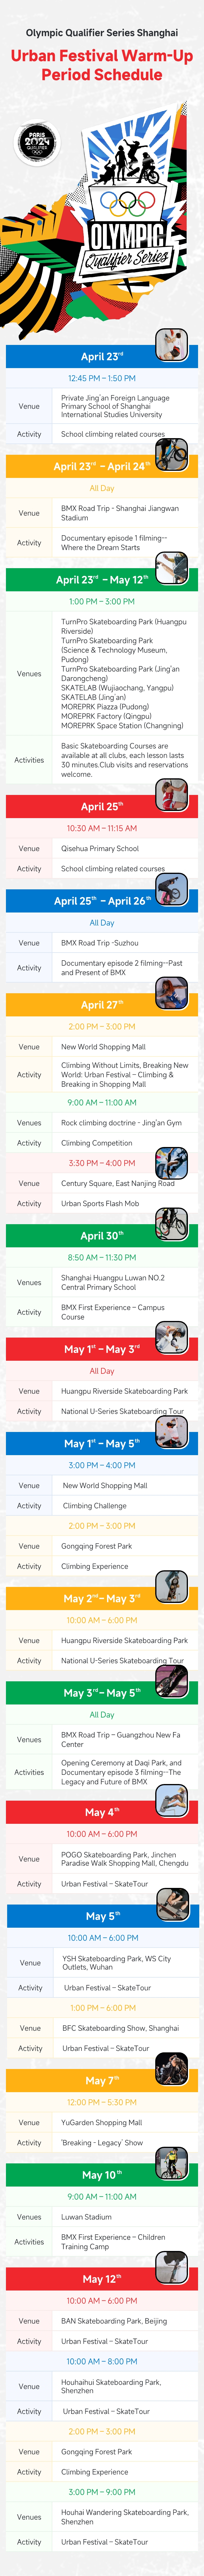 Warm-up events for Olympic Qualifier Series Shanghai.jpg